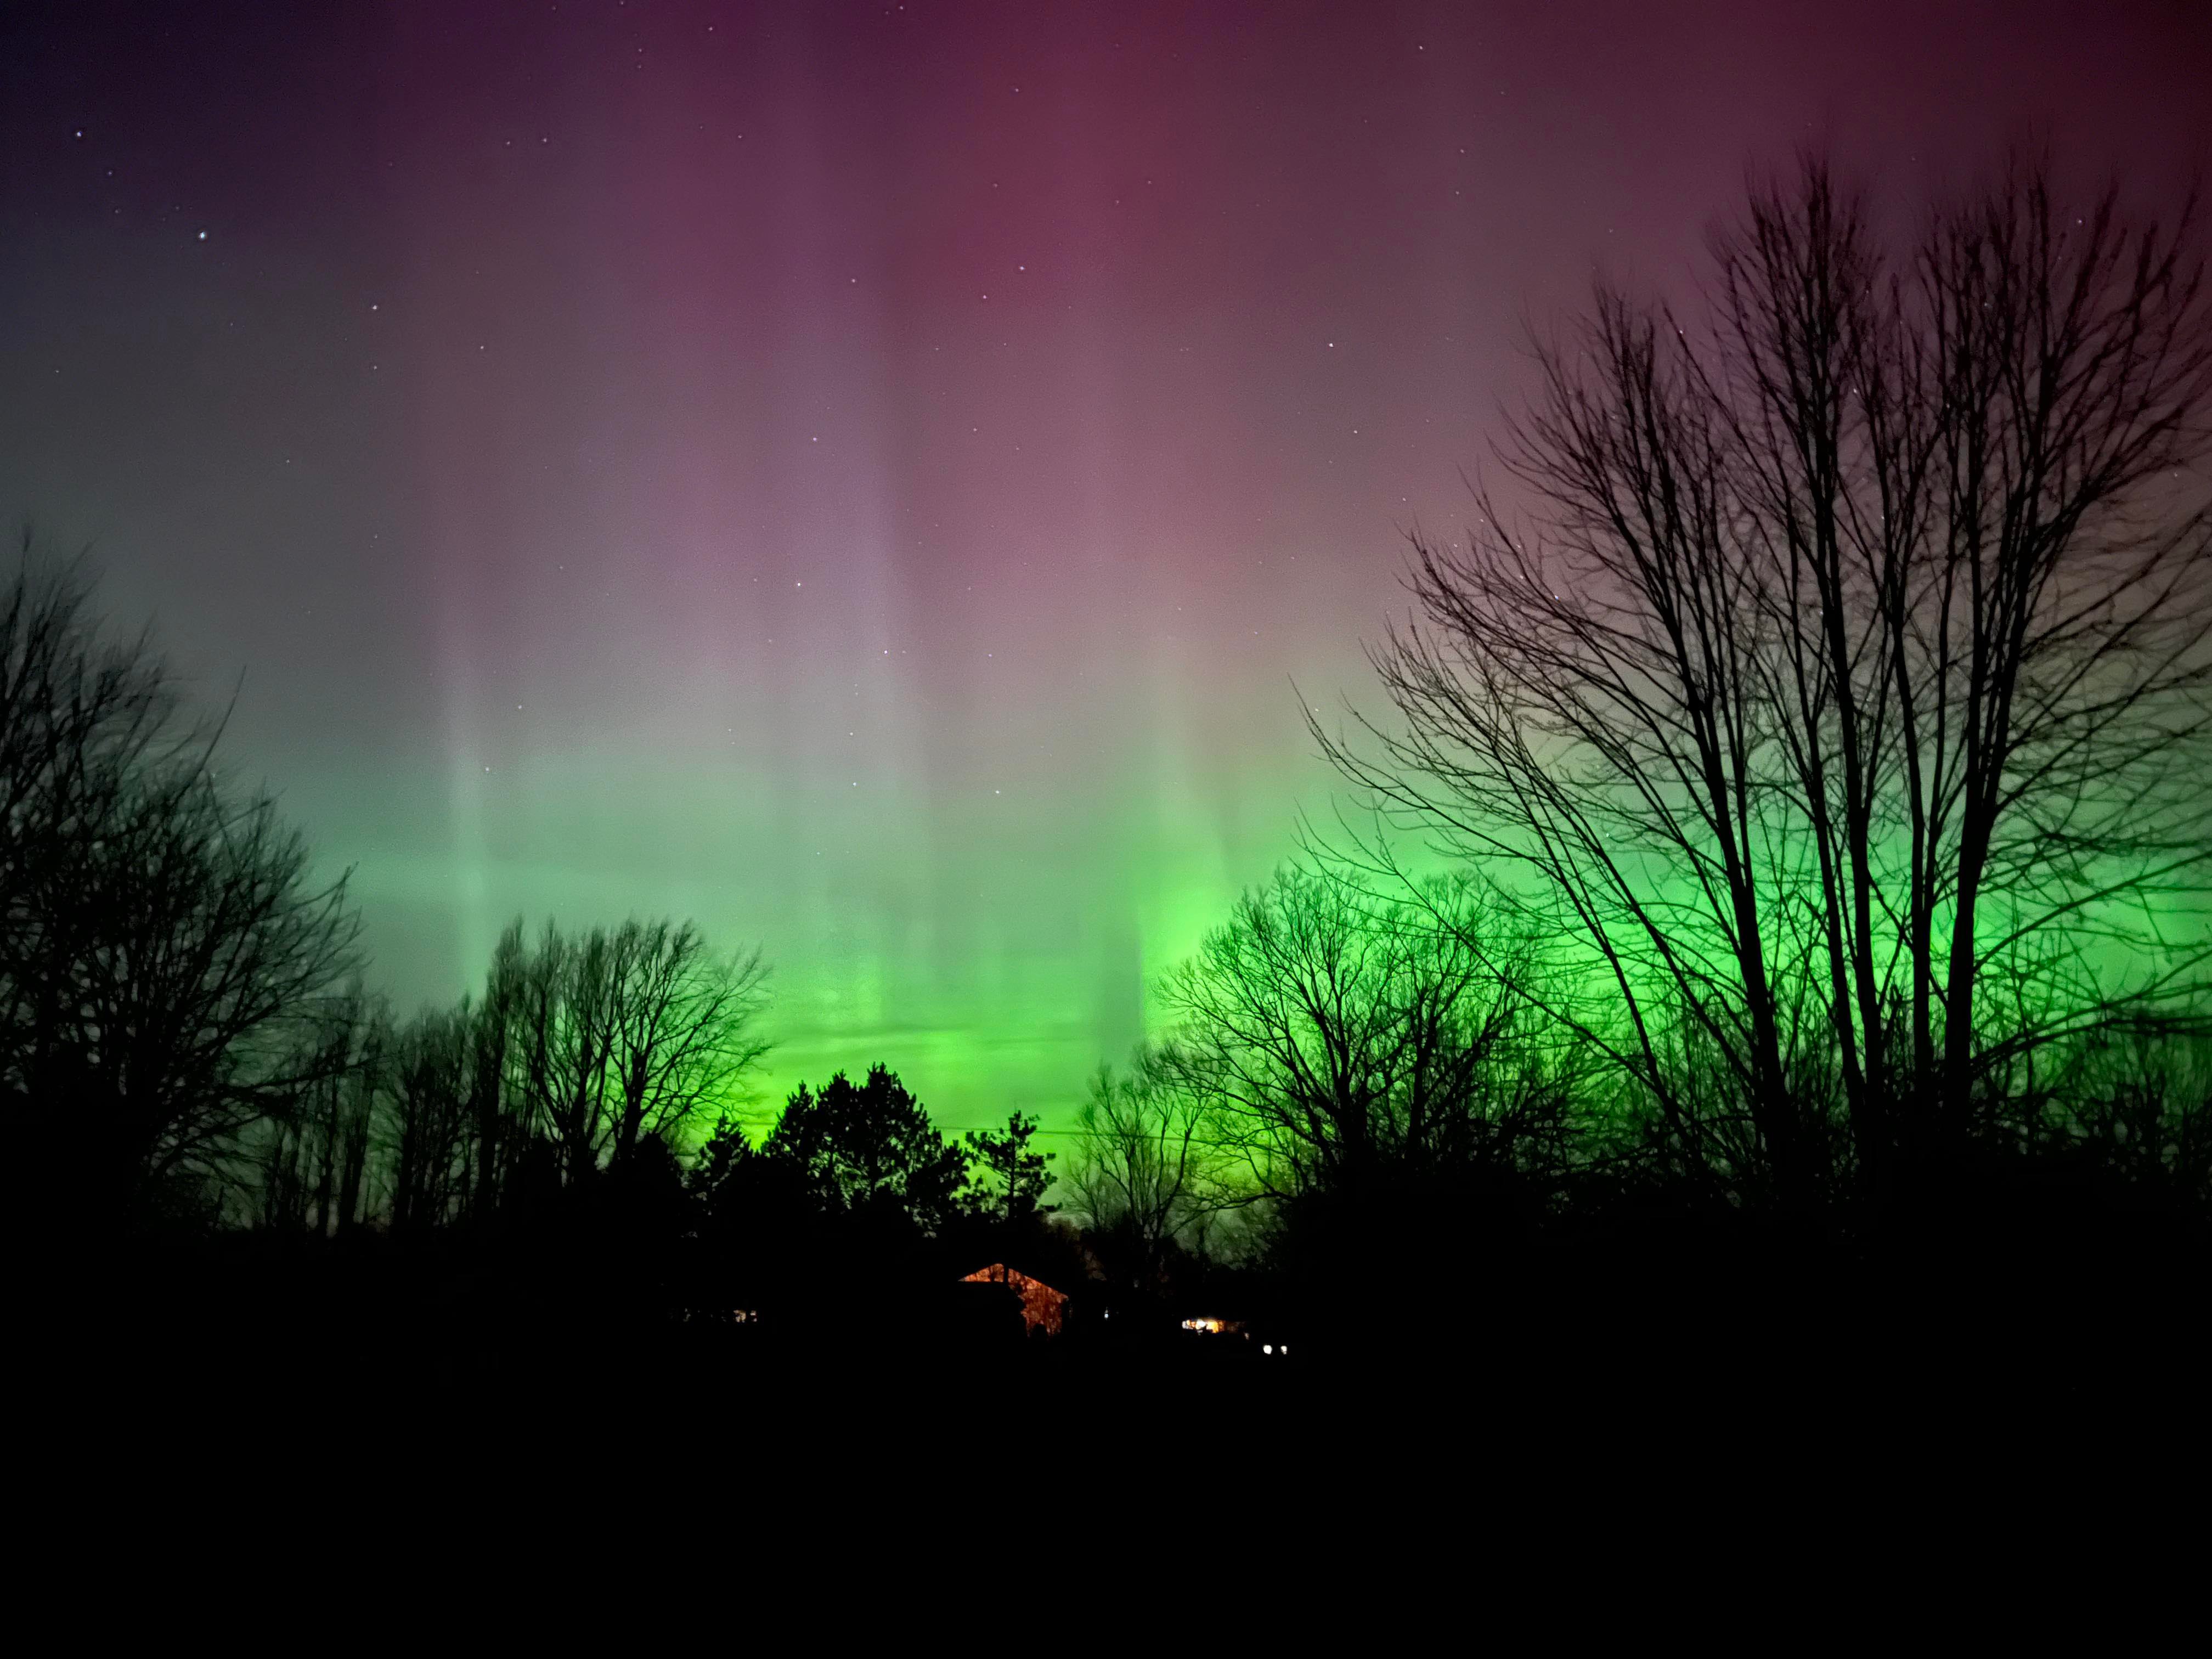 Michigan residents see beauty of the Northern Lights